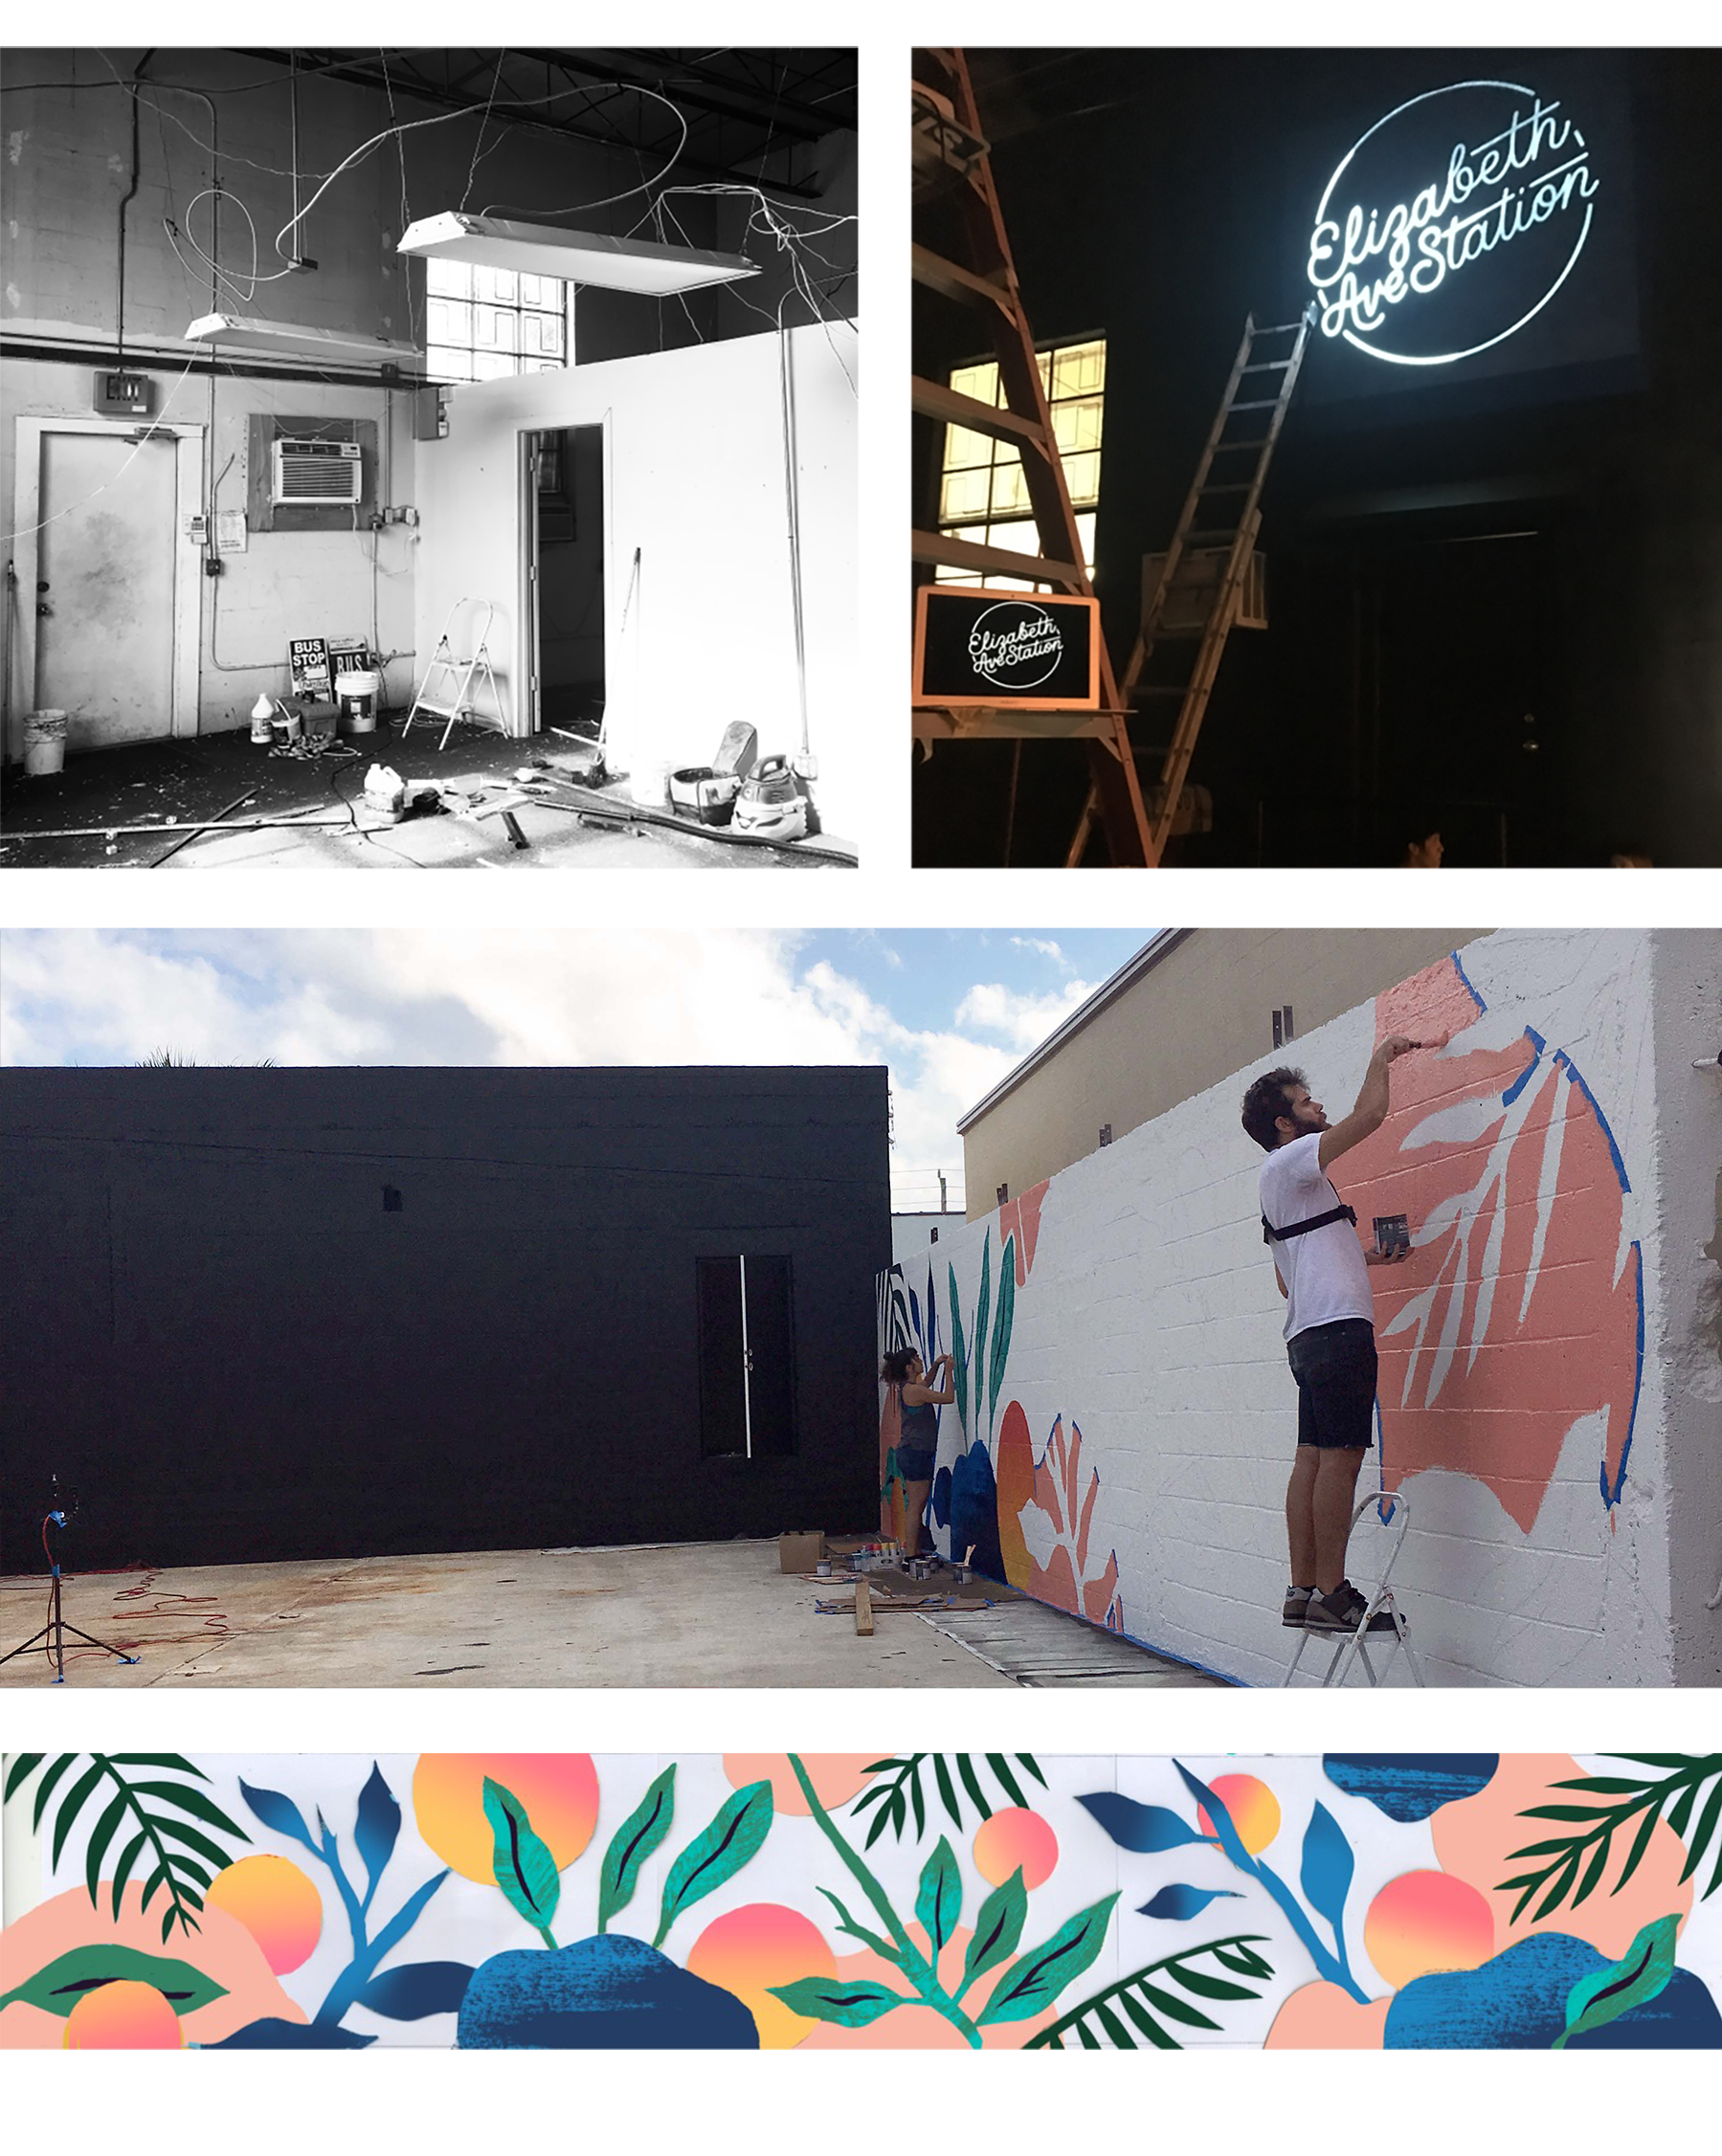 A collage of a black & white image of the interior room of an old warehouse, a ladder next to a projected logo about to be painted, a muralist paints a botanical scene in West Palm Beach, and concept artwork for Elizabeth Ave Stations courtyard mural